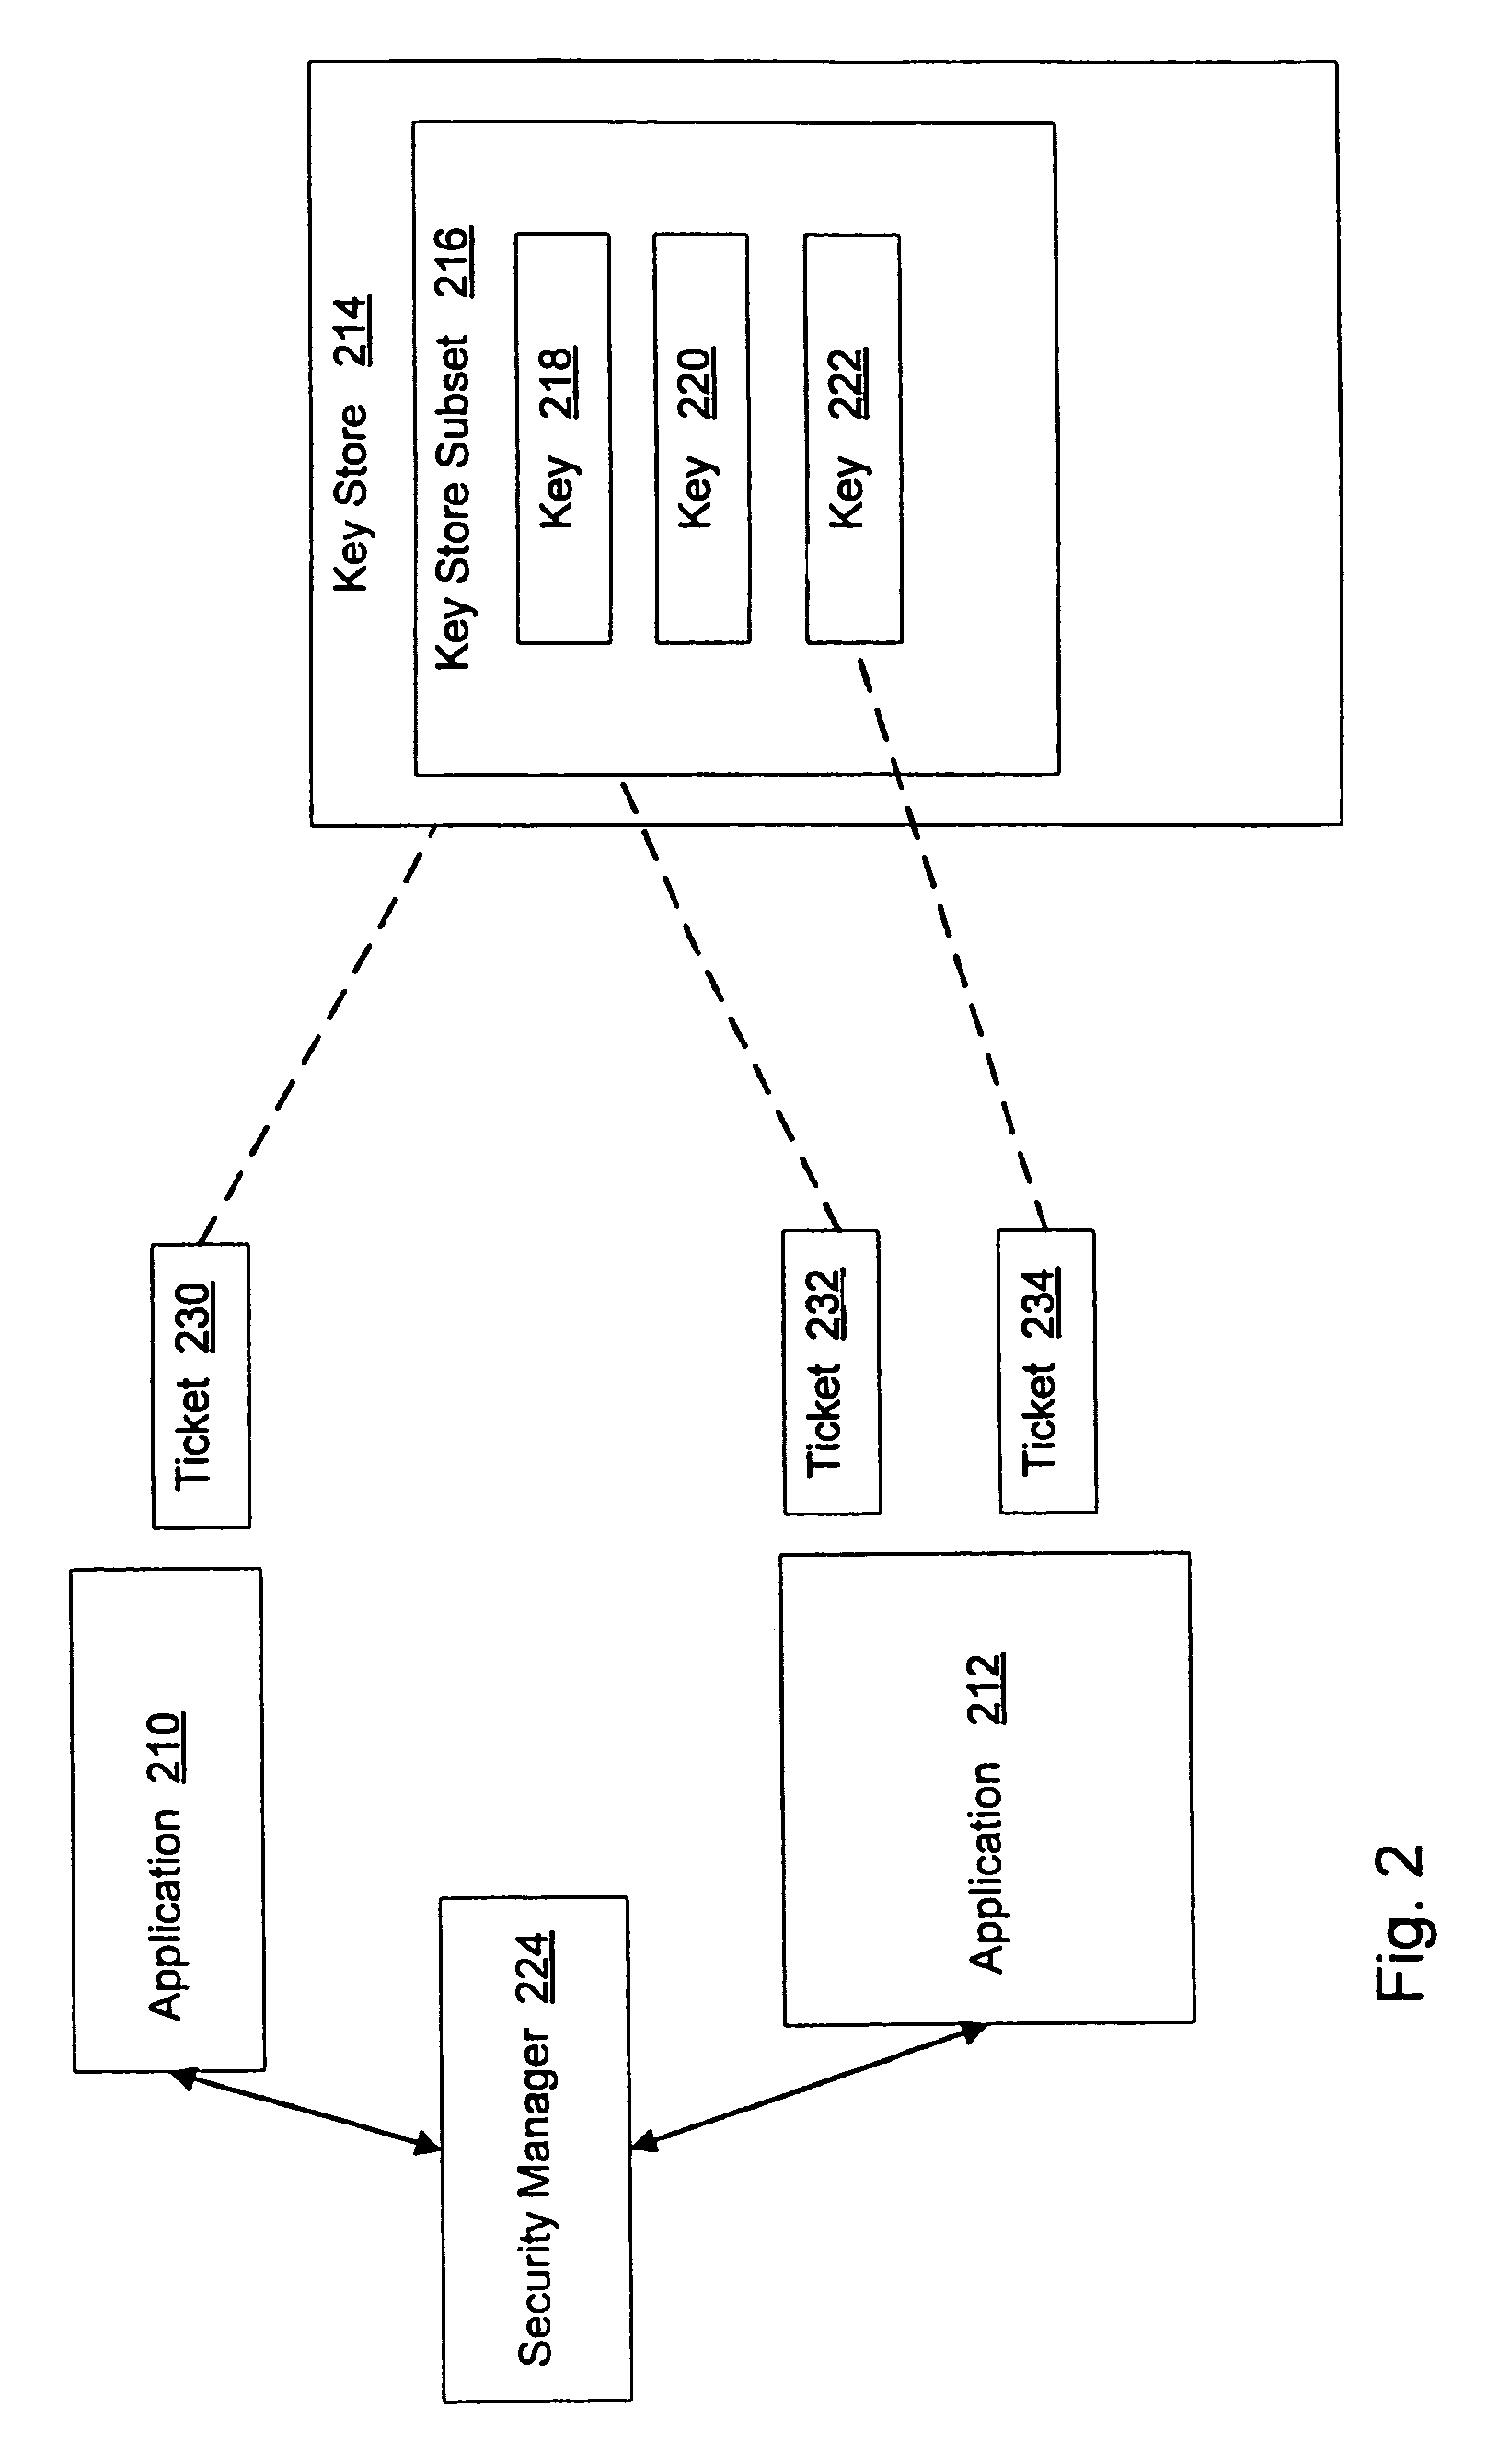 System and method for application authorization